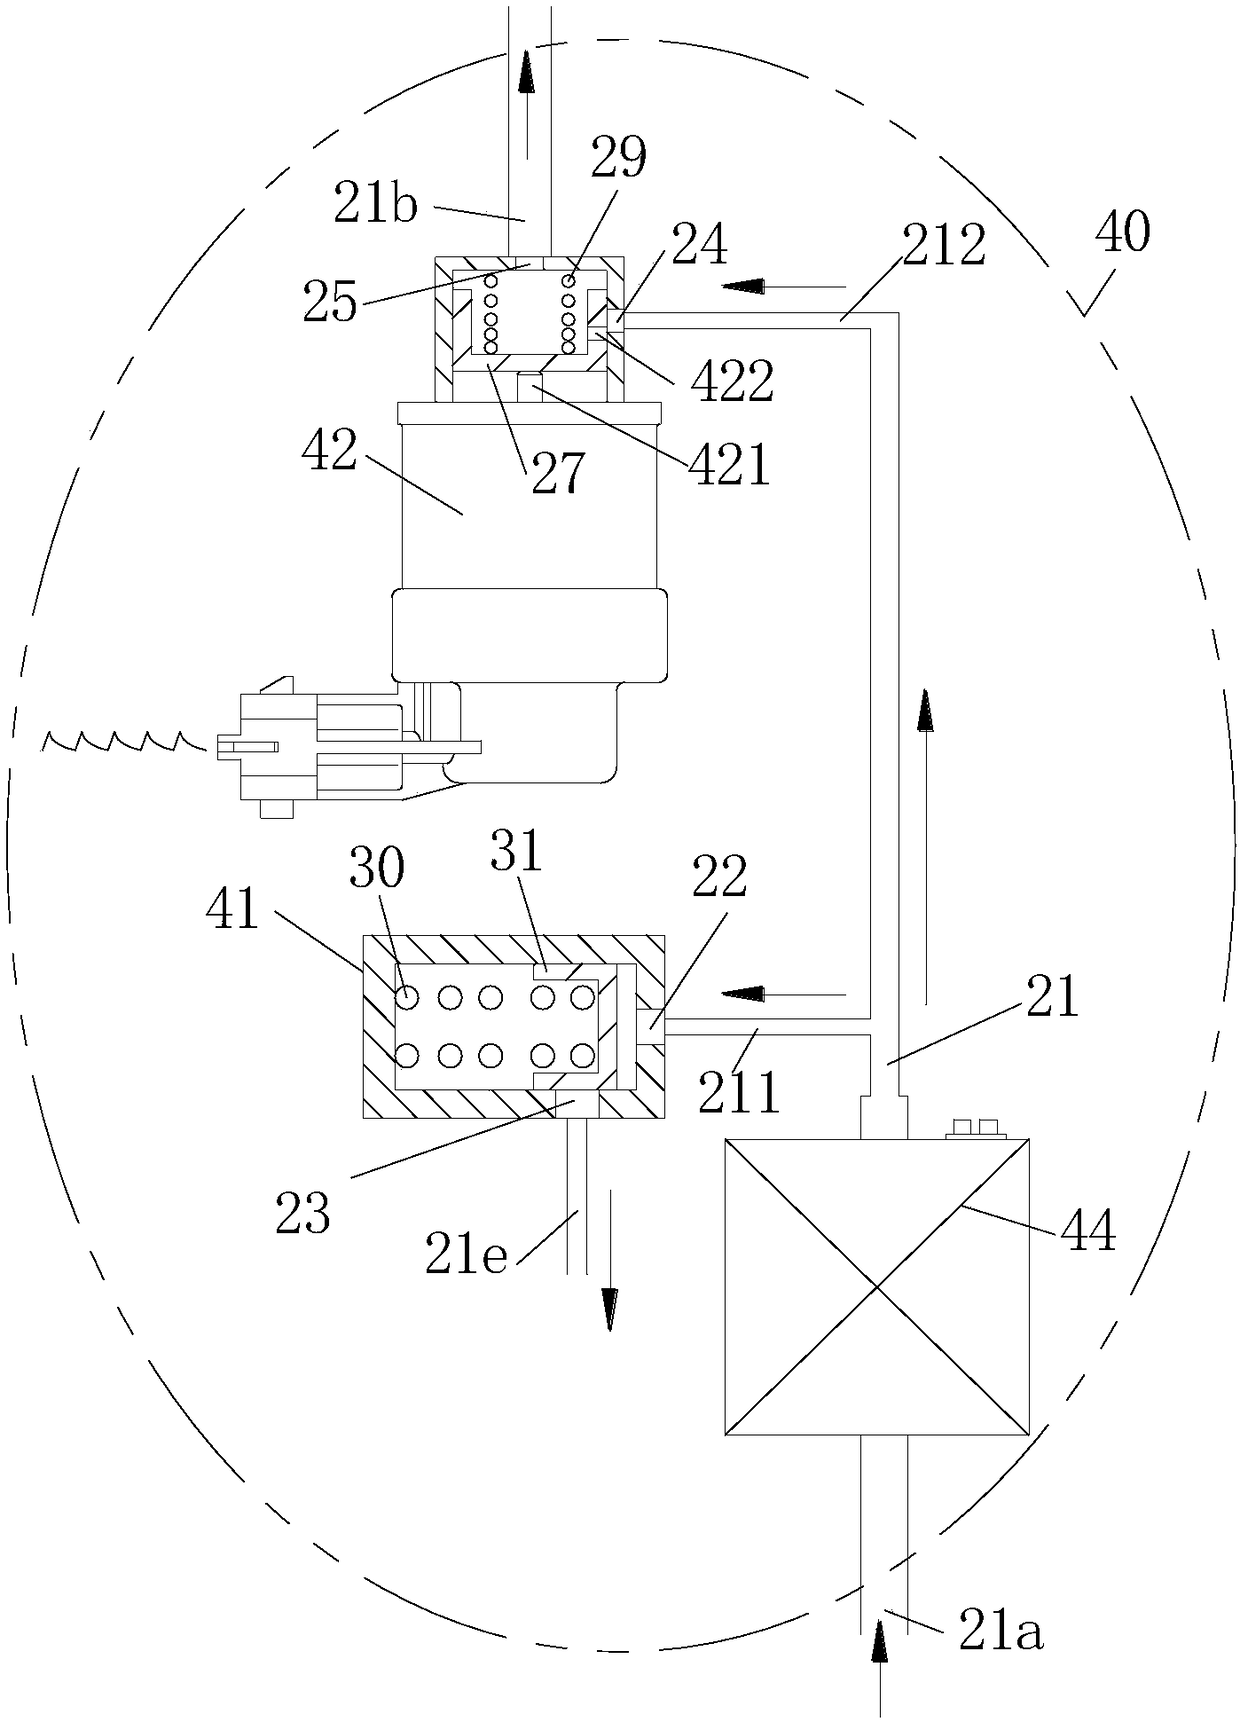 Self-priming, electronically controlled low-pressure fuel meter for internal combustion engines